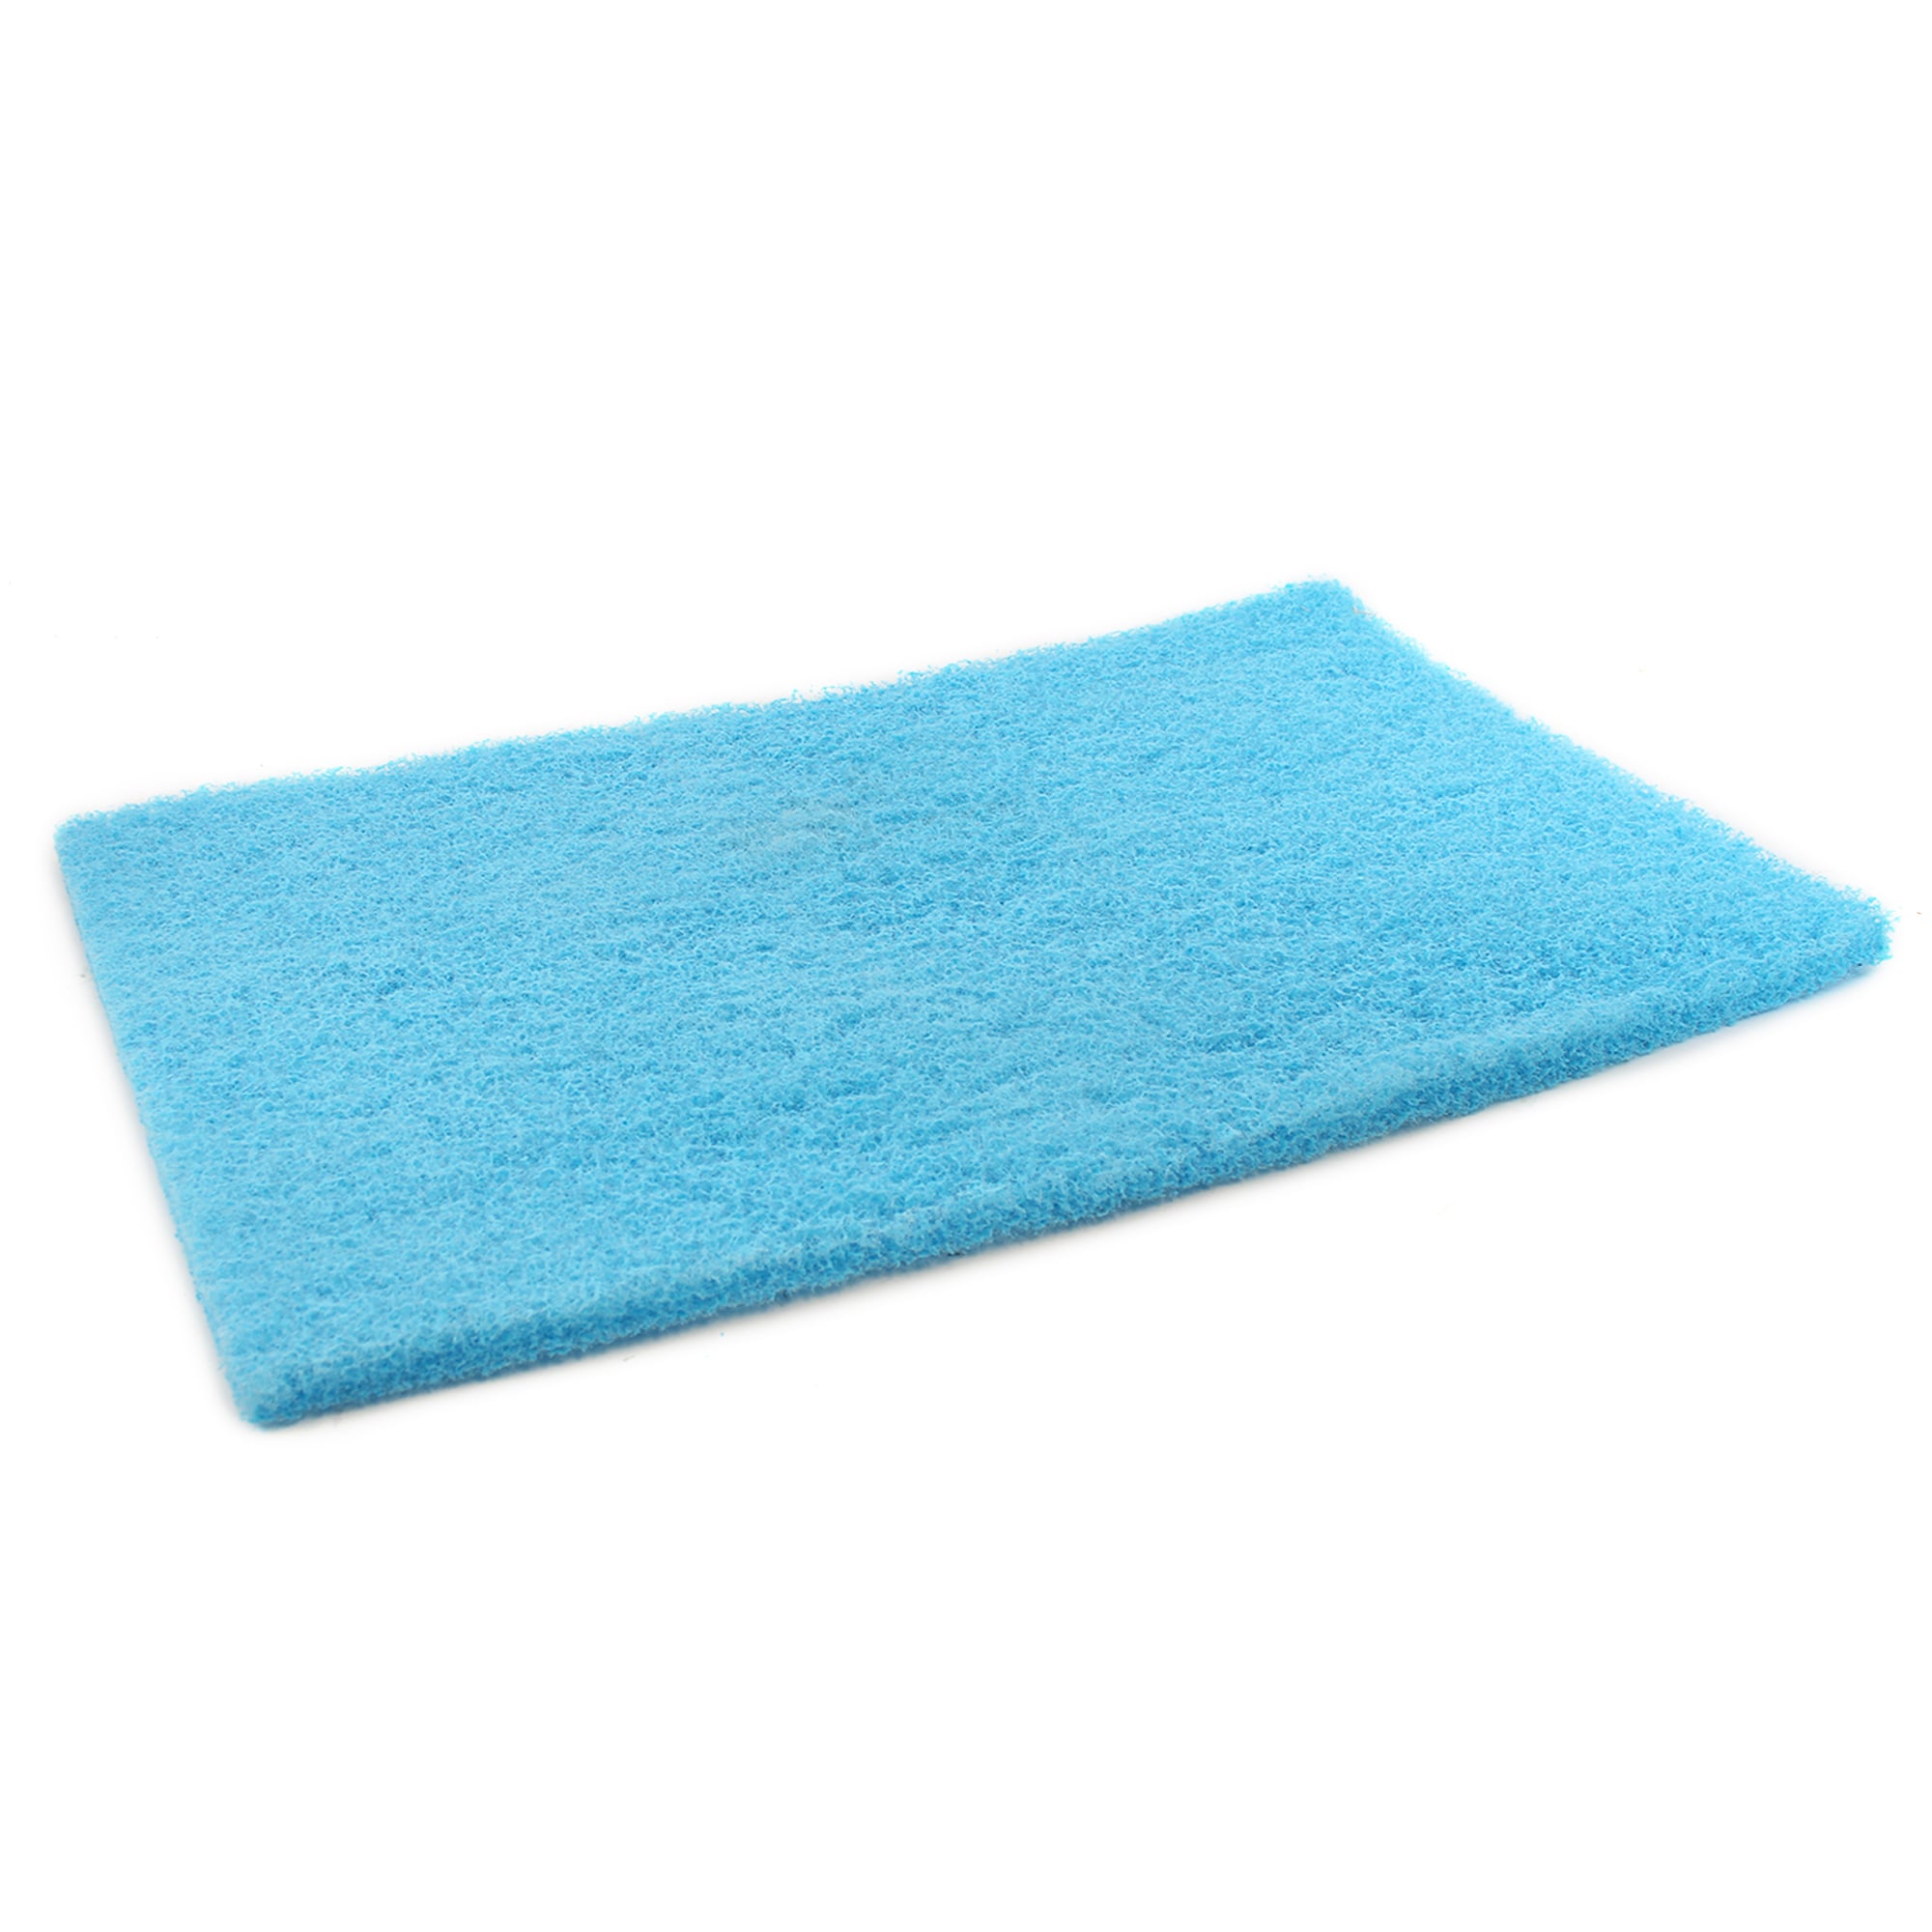 Dial Foamed Polyester Evaporative Cooler Replacement Pad in the